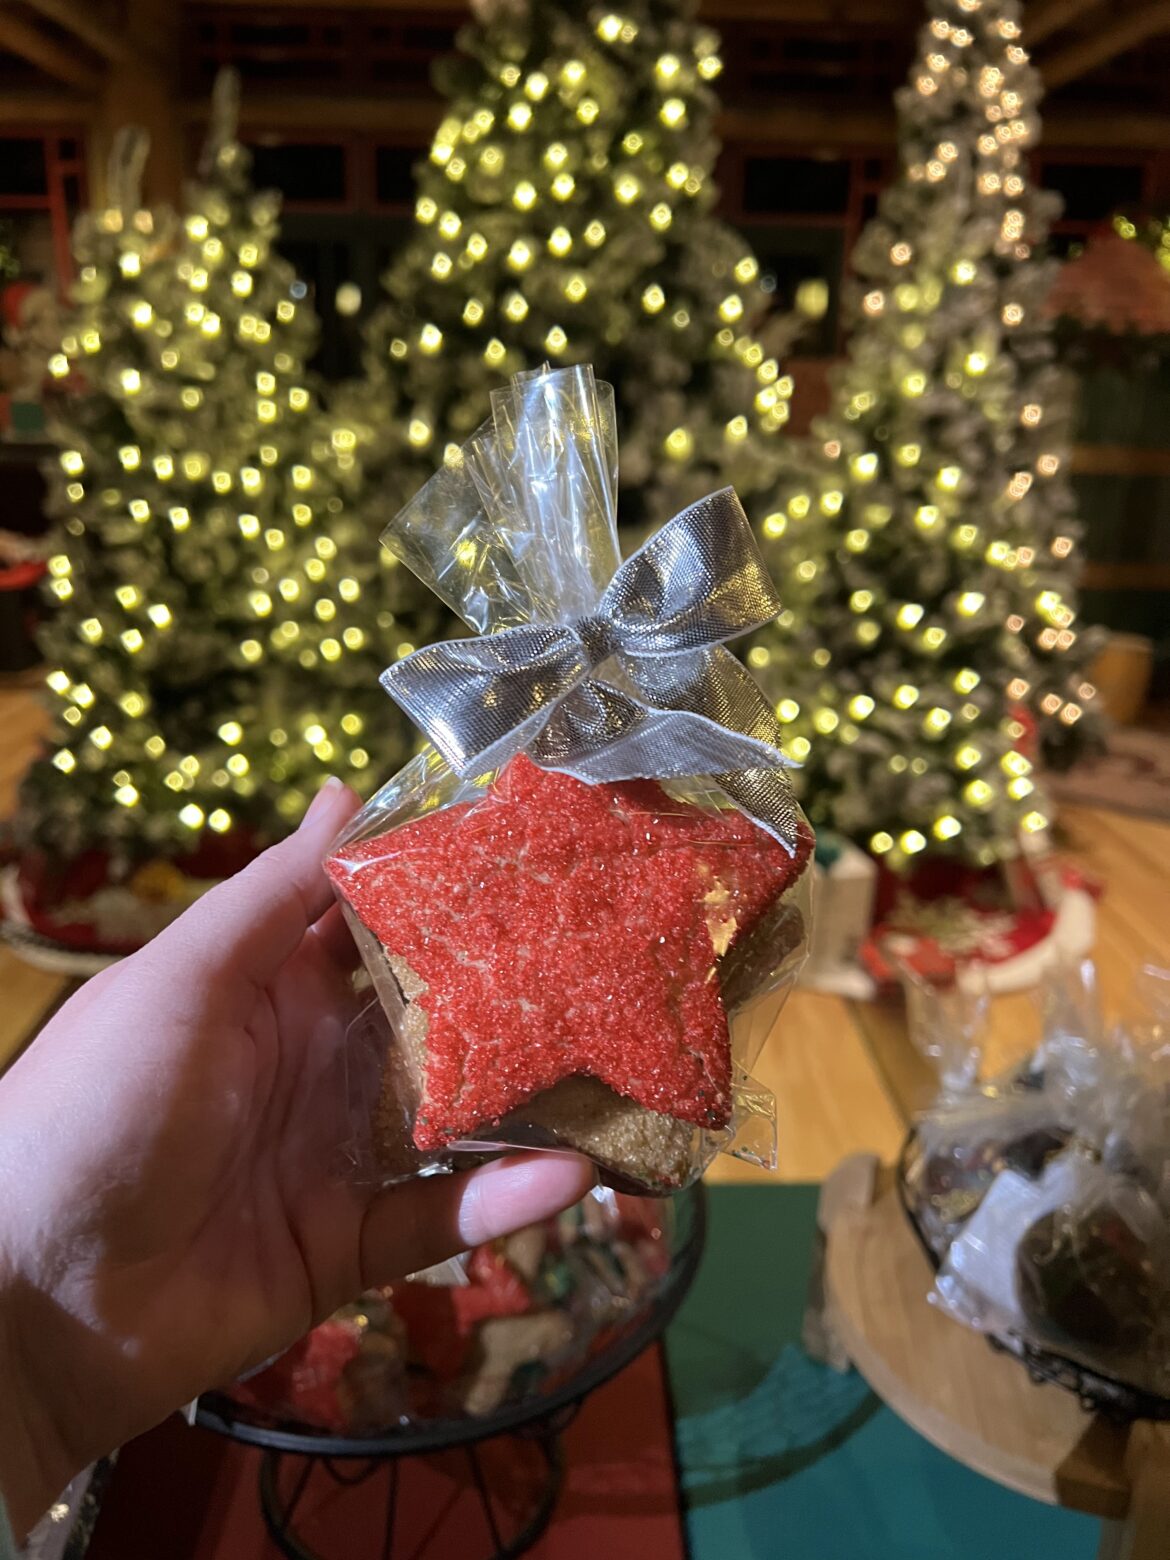 Disney’s Wilderness Lodge Holiday Treats Not to be Missed